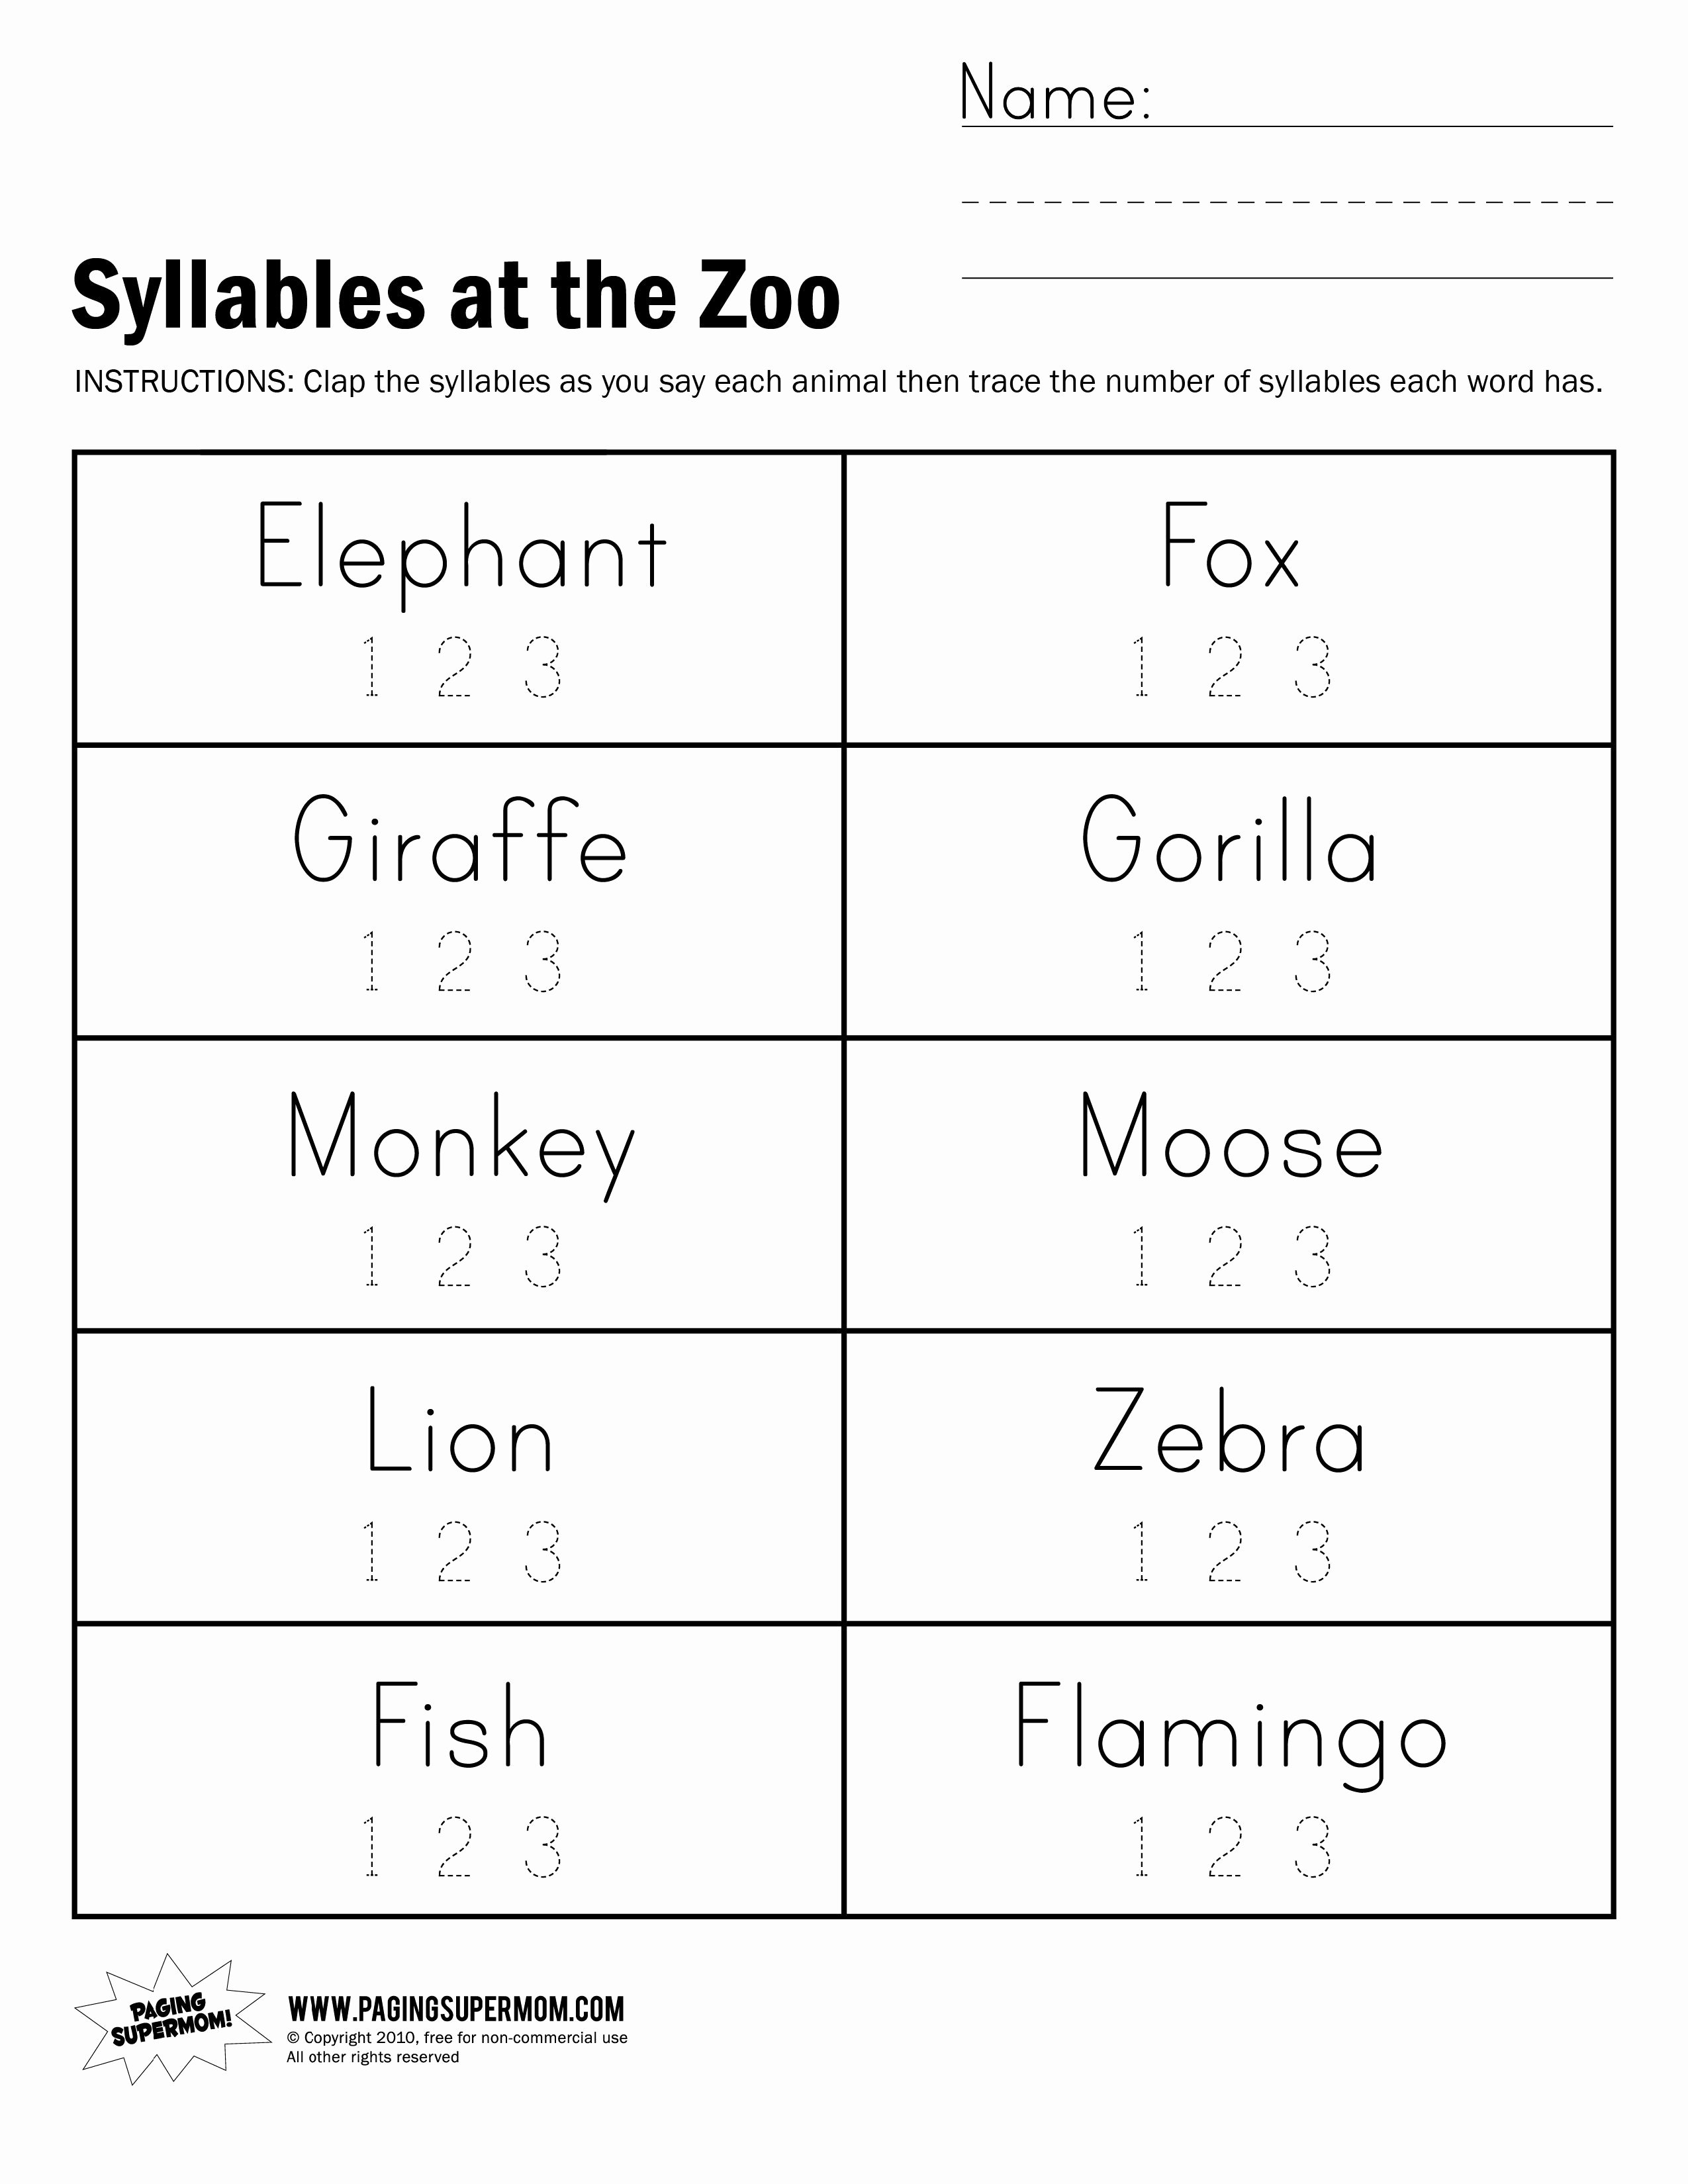 Syllable Worksheet for Kindergarten Lovely Syllables at the Zoo Worksheet Paging Supermom